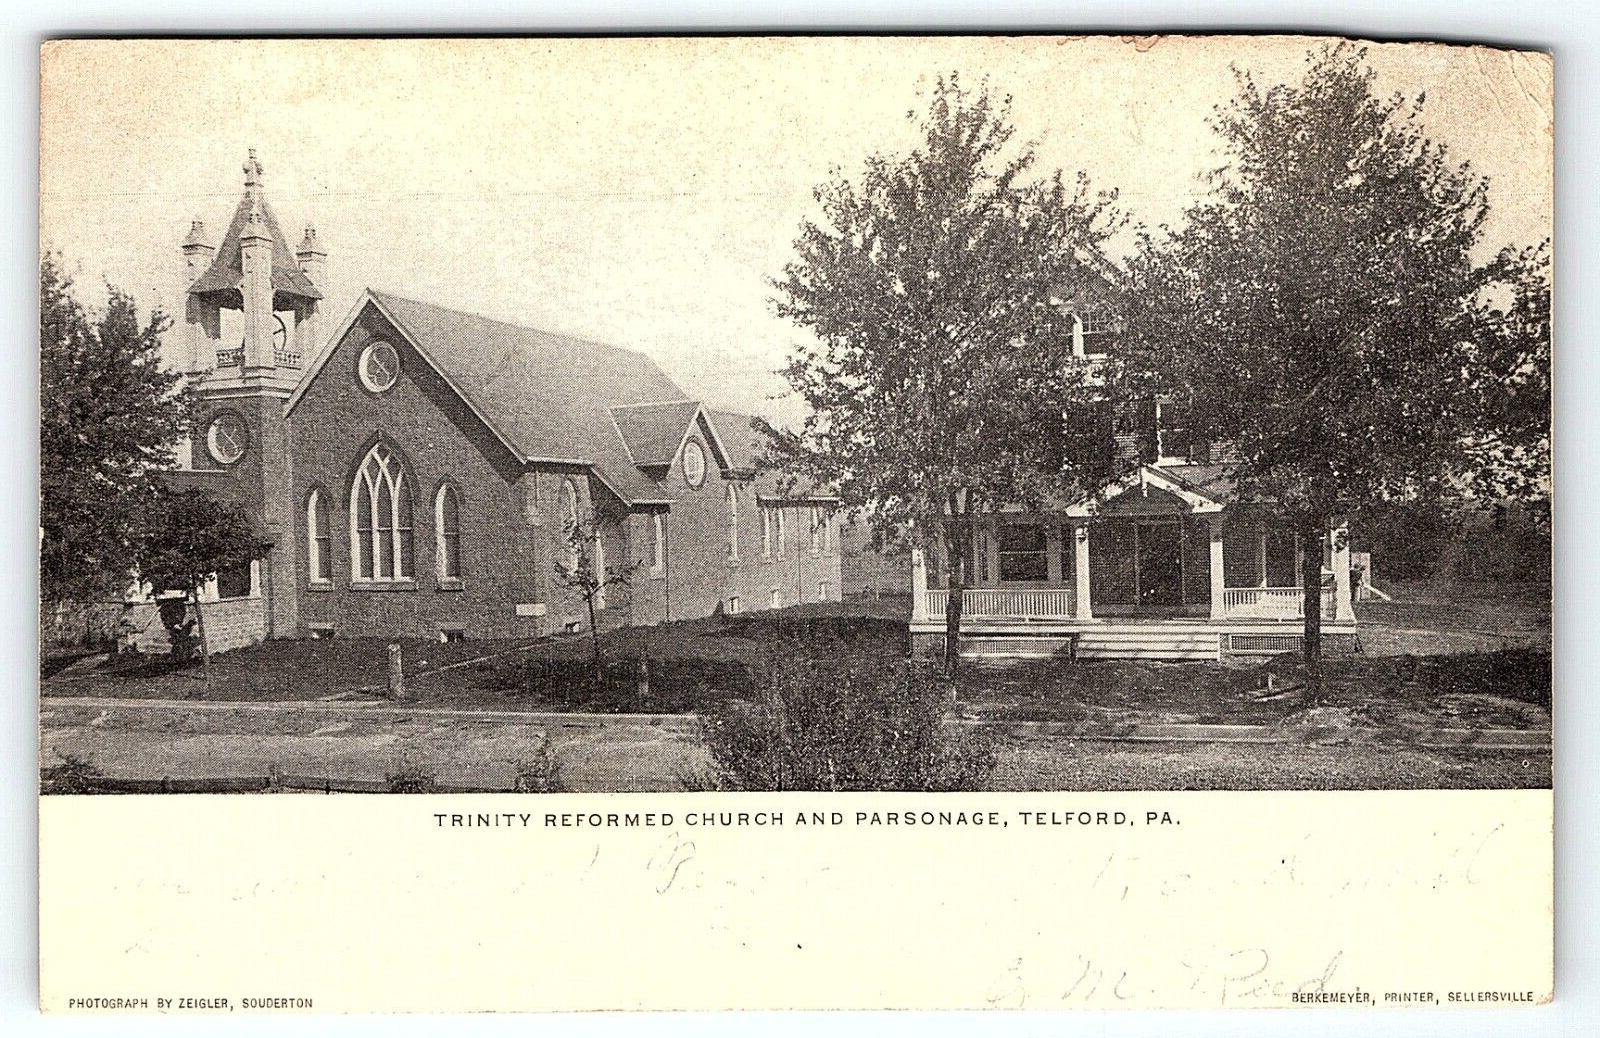 c1910 TELFORD PA TRINITY REFORMED CHURCH AND PARSONAGE EARLY POSTCARD P4093